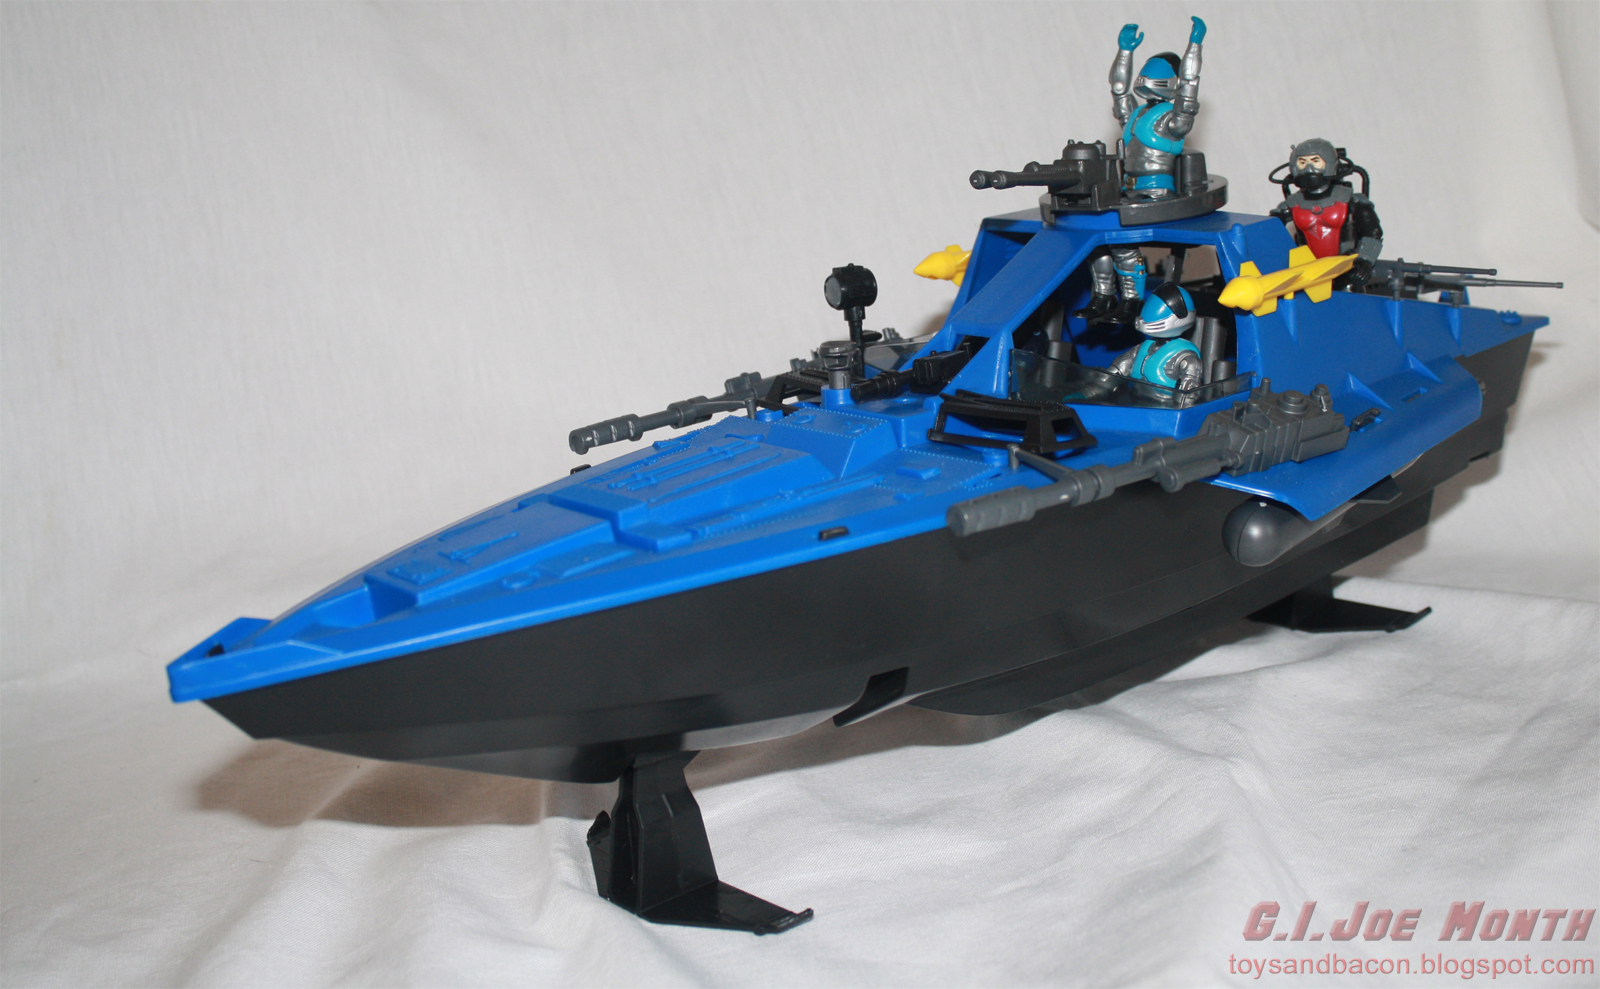 Toys and Bacon: G.I. Joe Month: Cobra Moray Hydrofoil... Almost